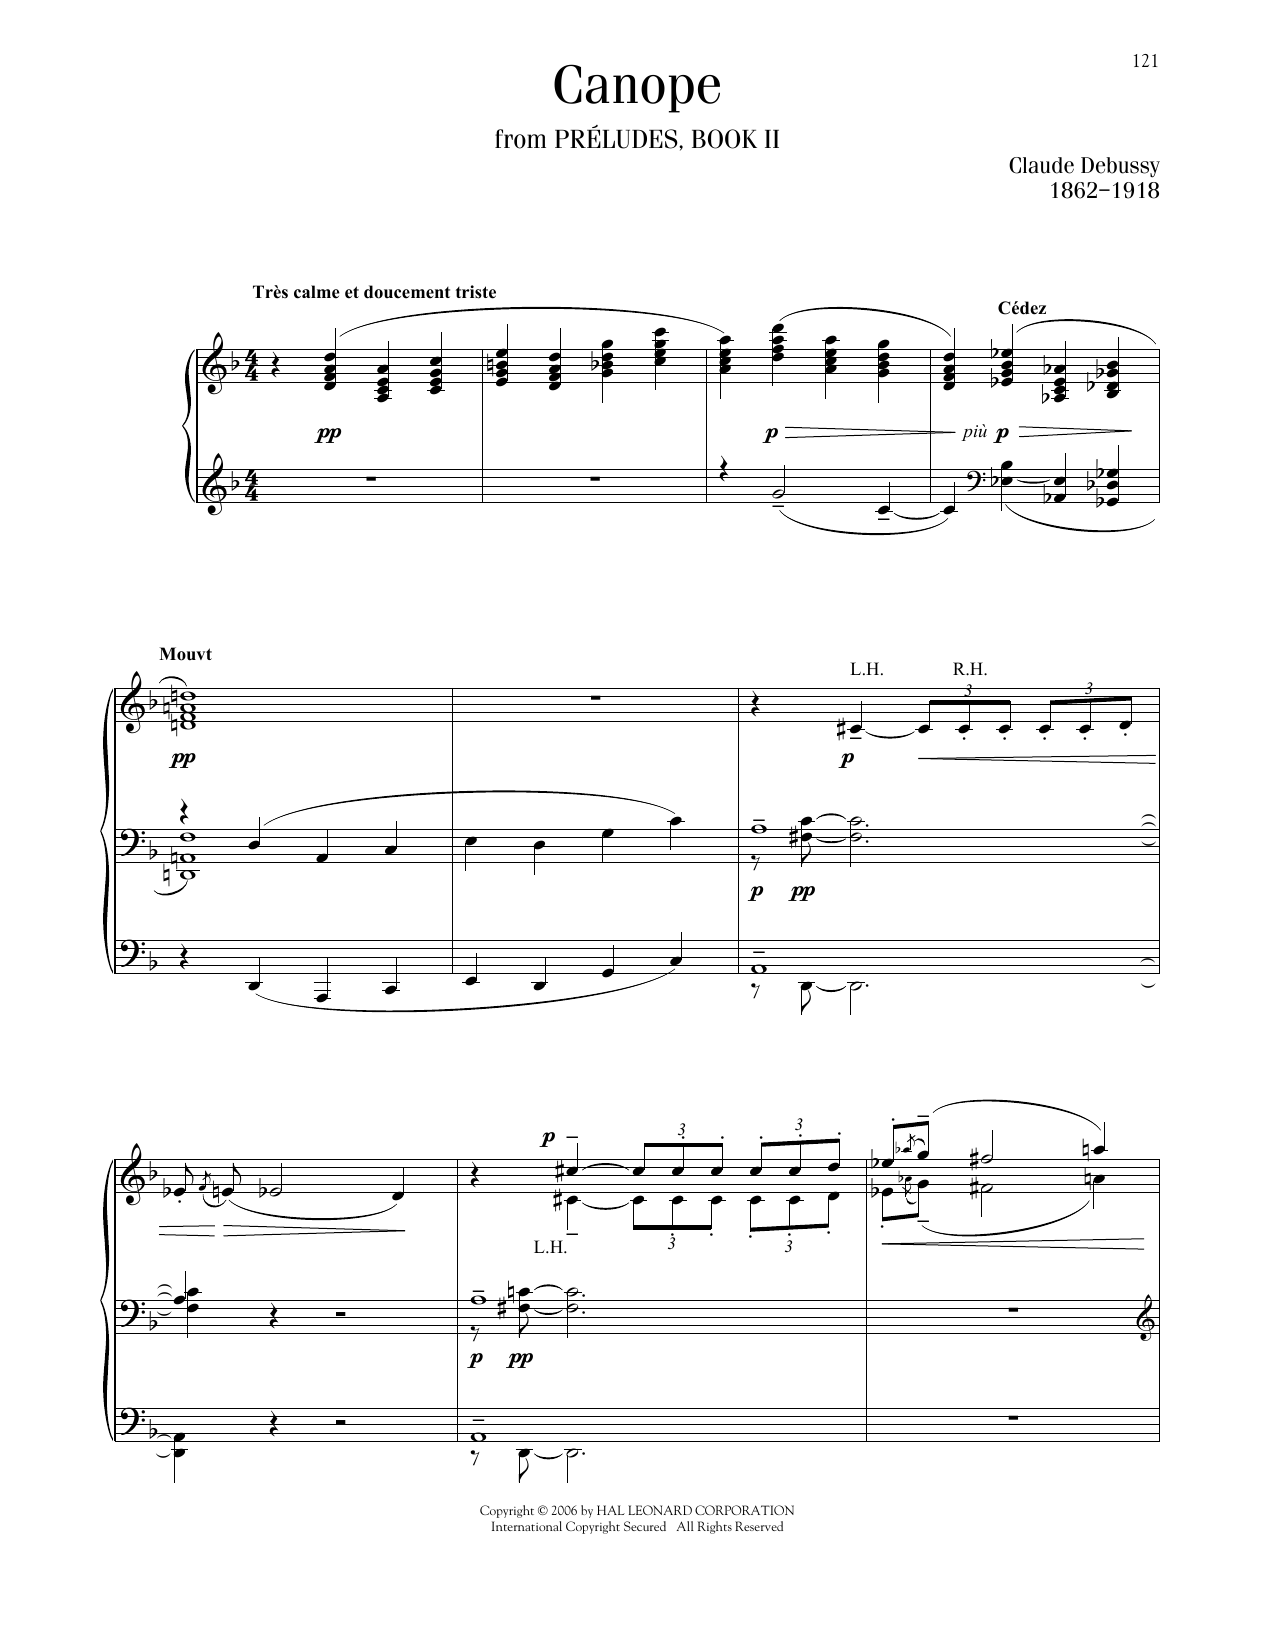 Claude Debussy Canope sheet music notes printable PDF score